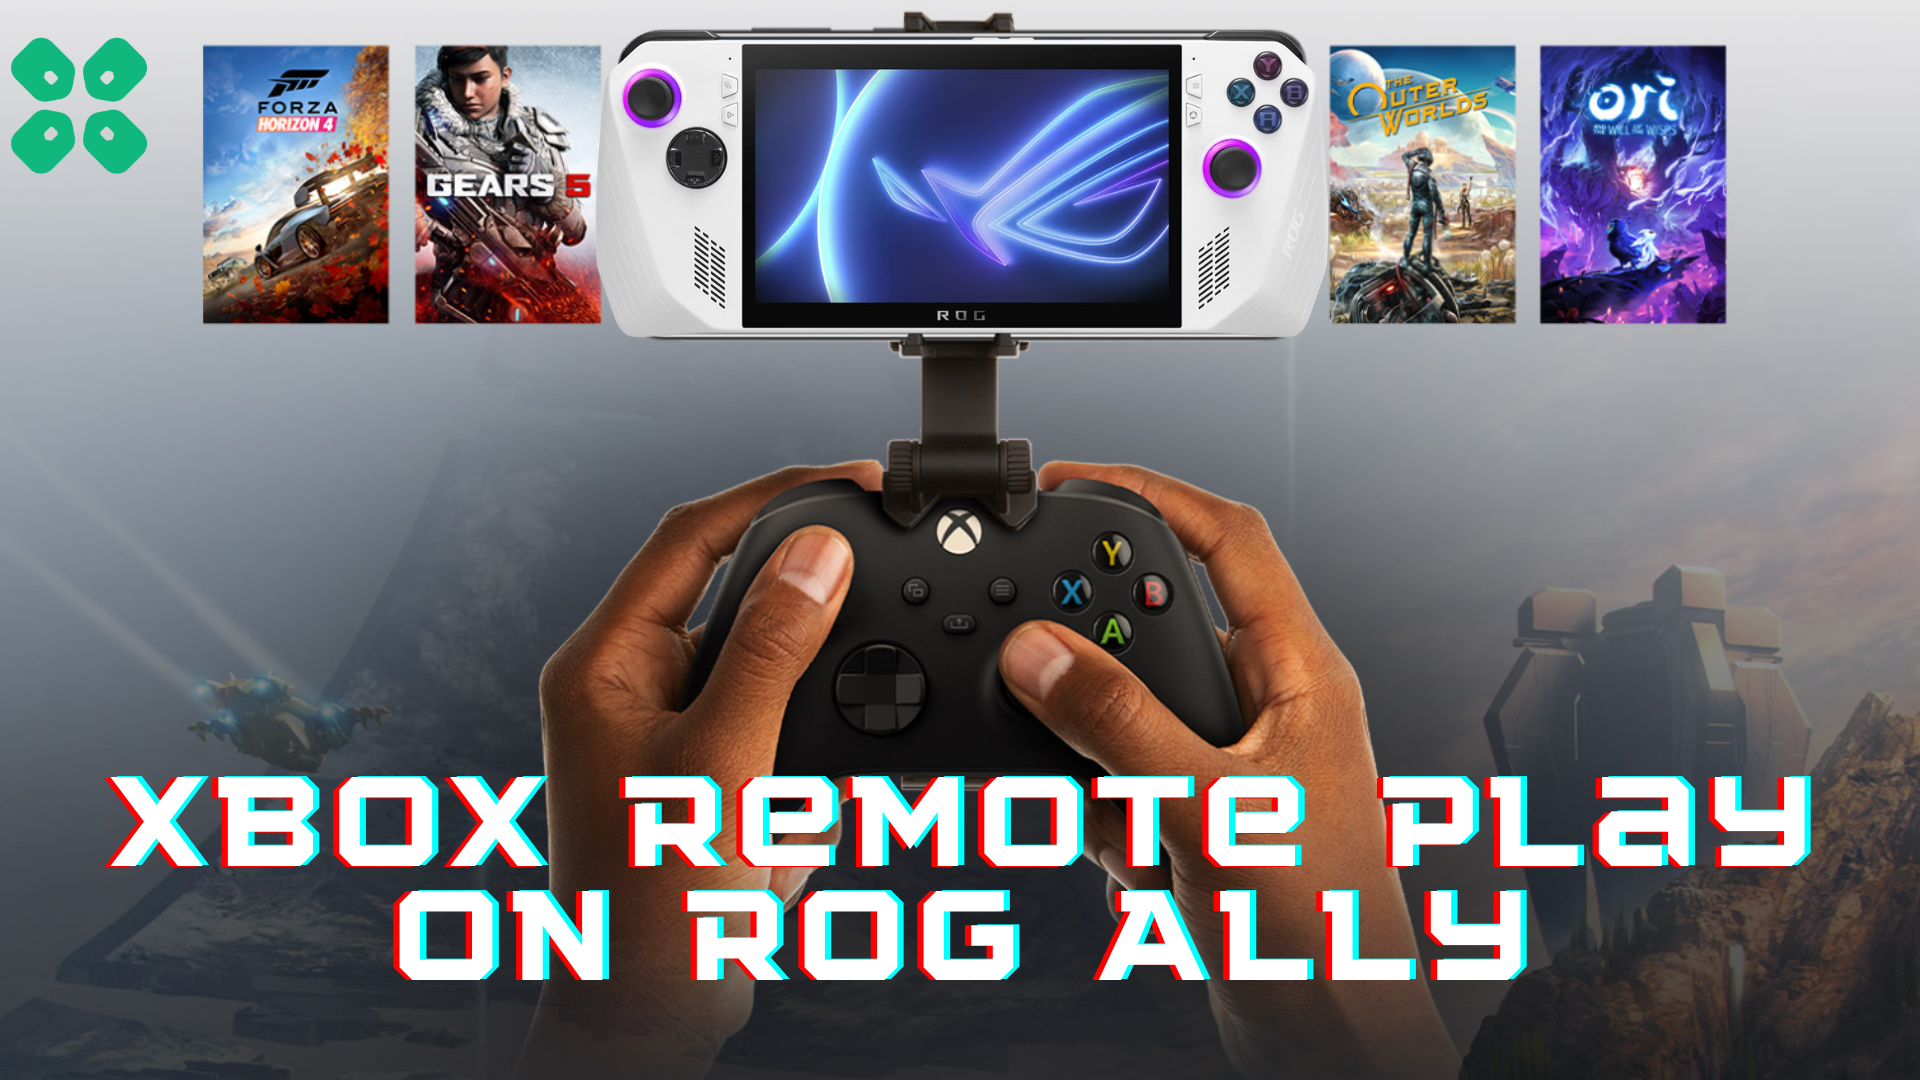 Setting Up Xbox Remote Play on Asus ROG Ally